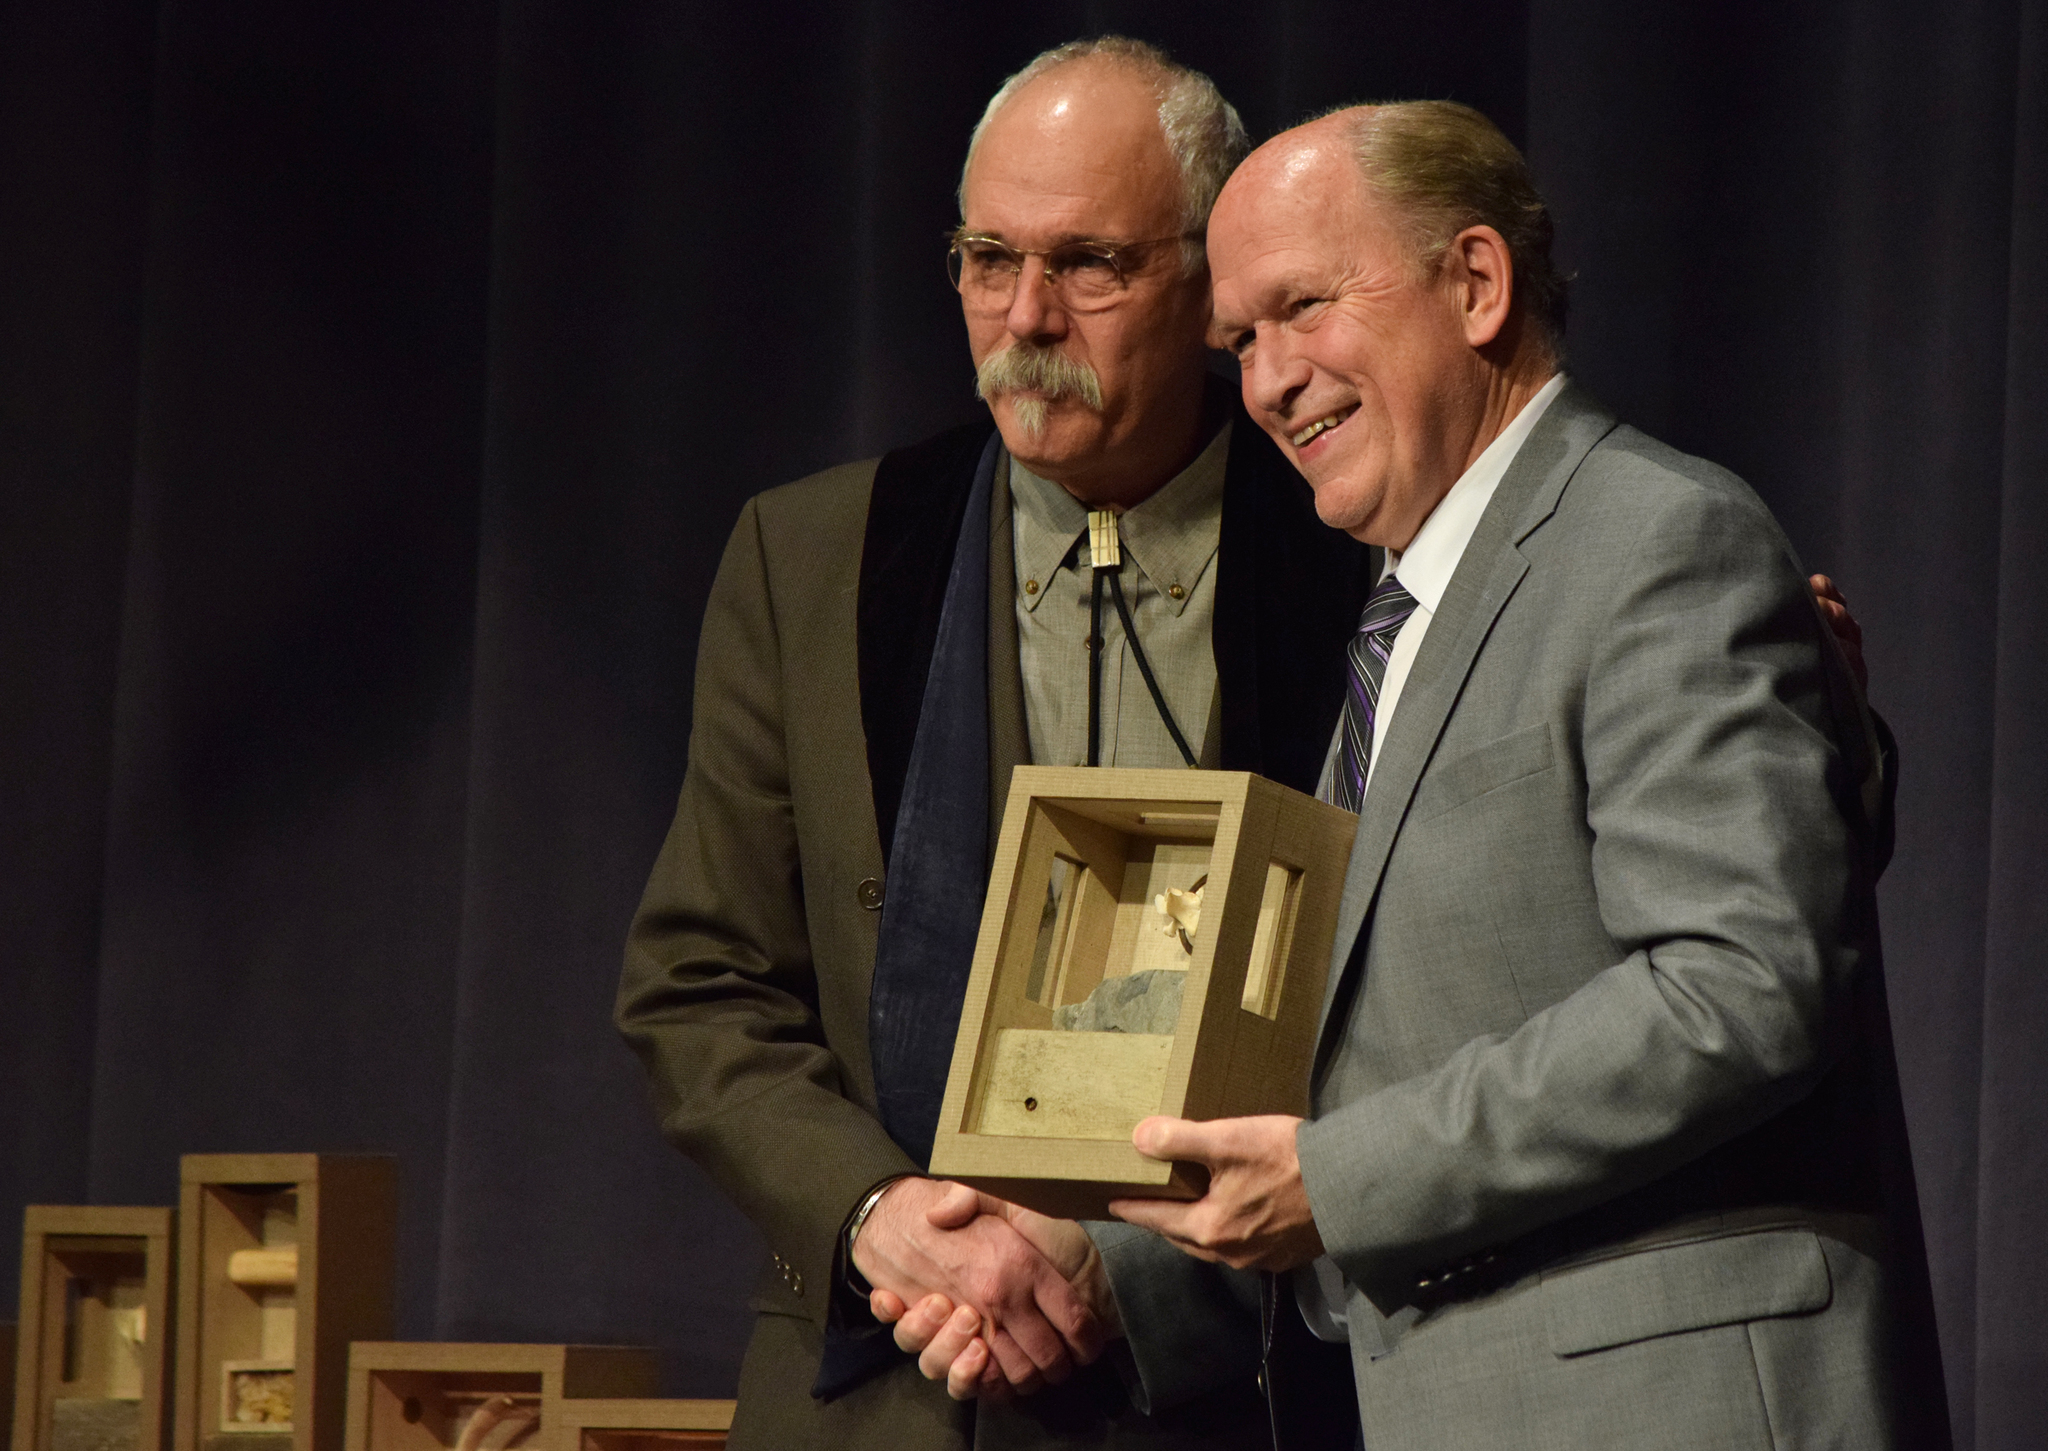 Bob Banghart of Juneau accepts a Distinguished Service to the Humanities award from Gov. Bill Walker on Thursday night 2017 at the Juneau Arts and Culture Center during the 2017 Governor’s Awards for the Arts and Humanities. (James Brooks | Juneau Empire)